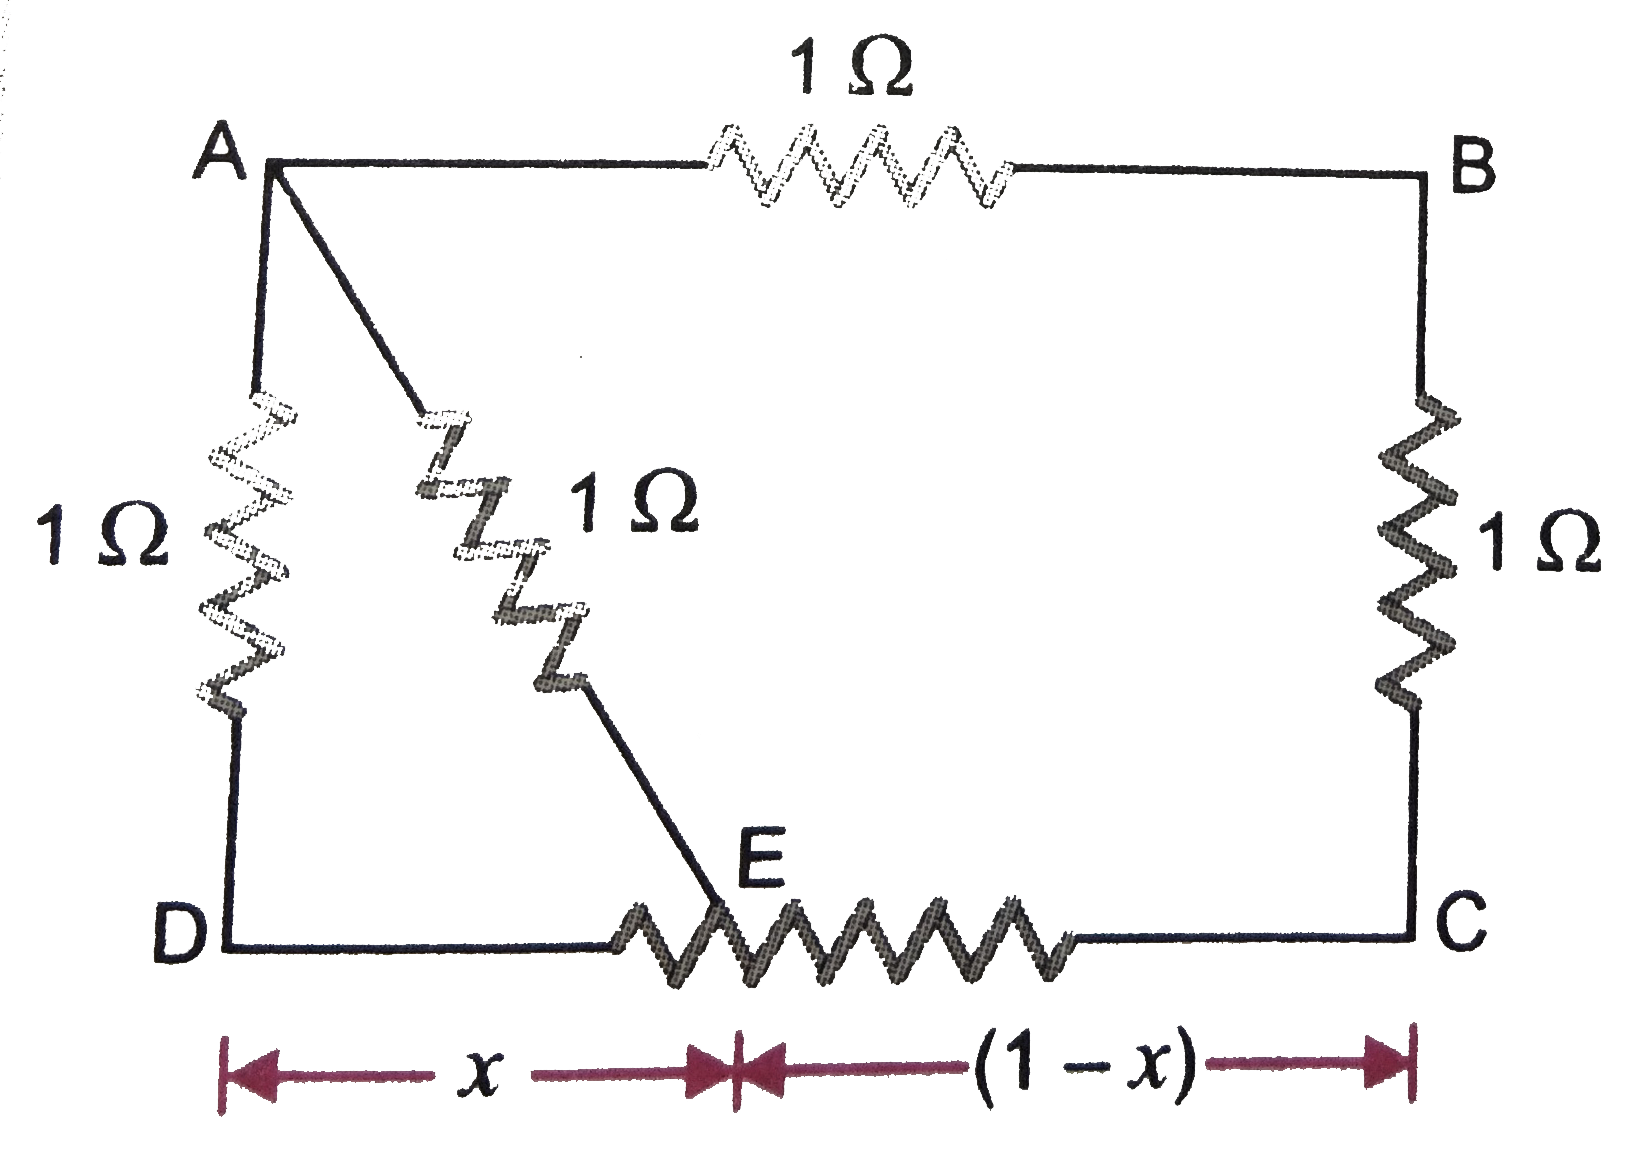 ABCD is a square where each side is a uniform wire of resistance 1 Omega. Find a point E on CD such that if a uniform wire of resistance 1 Omega is connected across AE and a constant potential is applied across A and C, the points B and E will be equipotential.